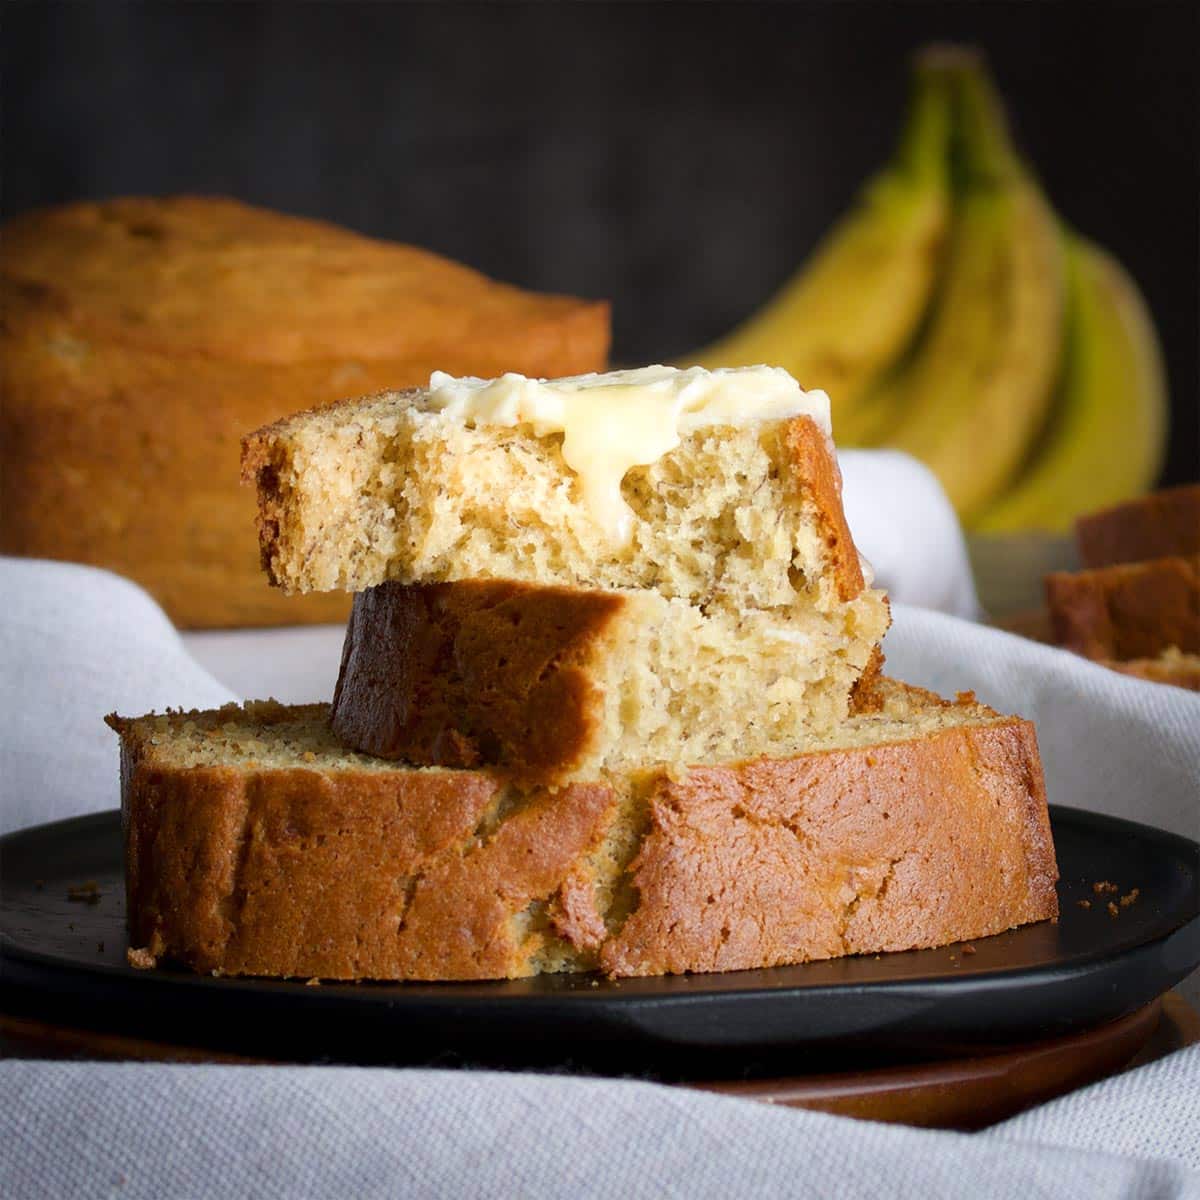 Several slices of banana bread on a plate topped with butter.